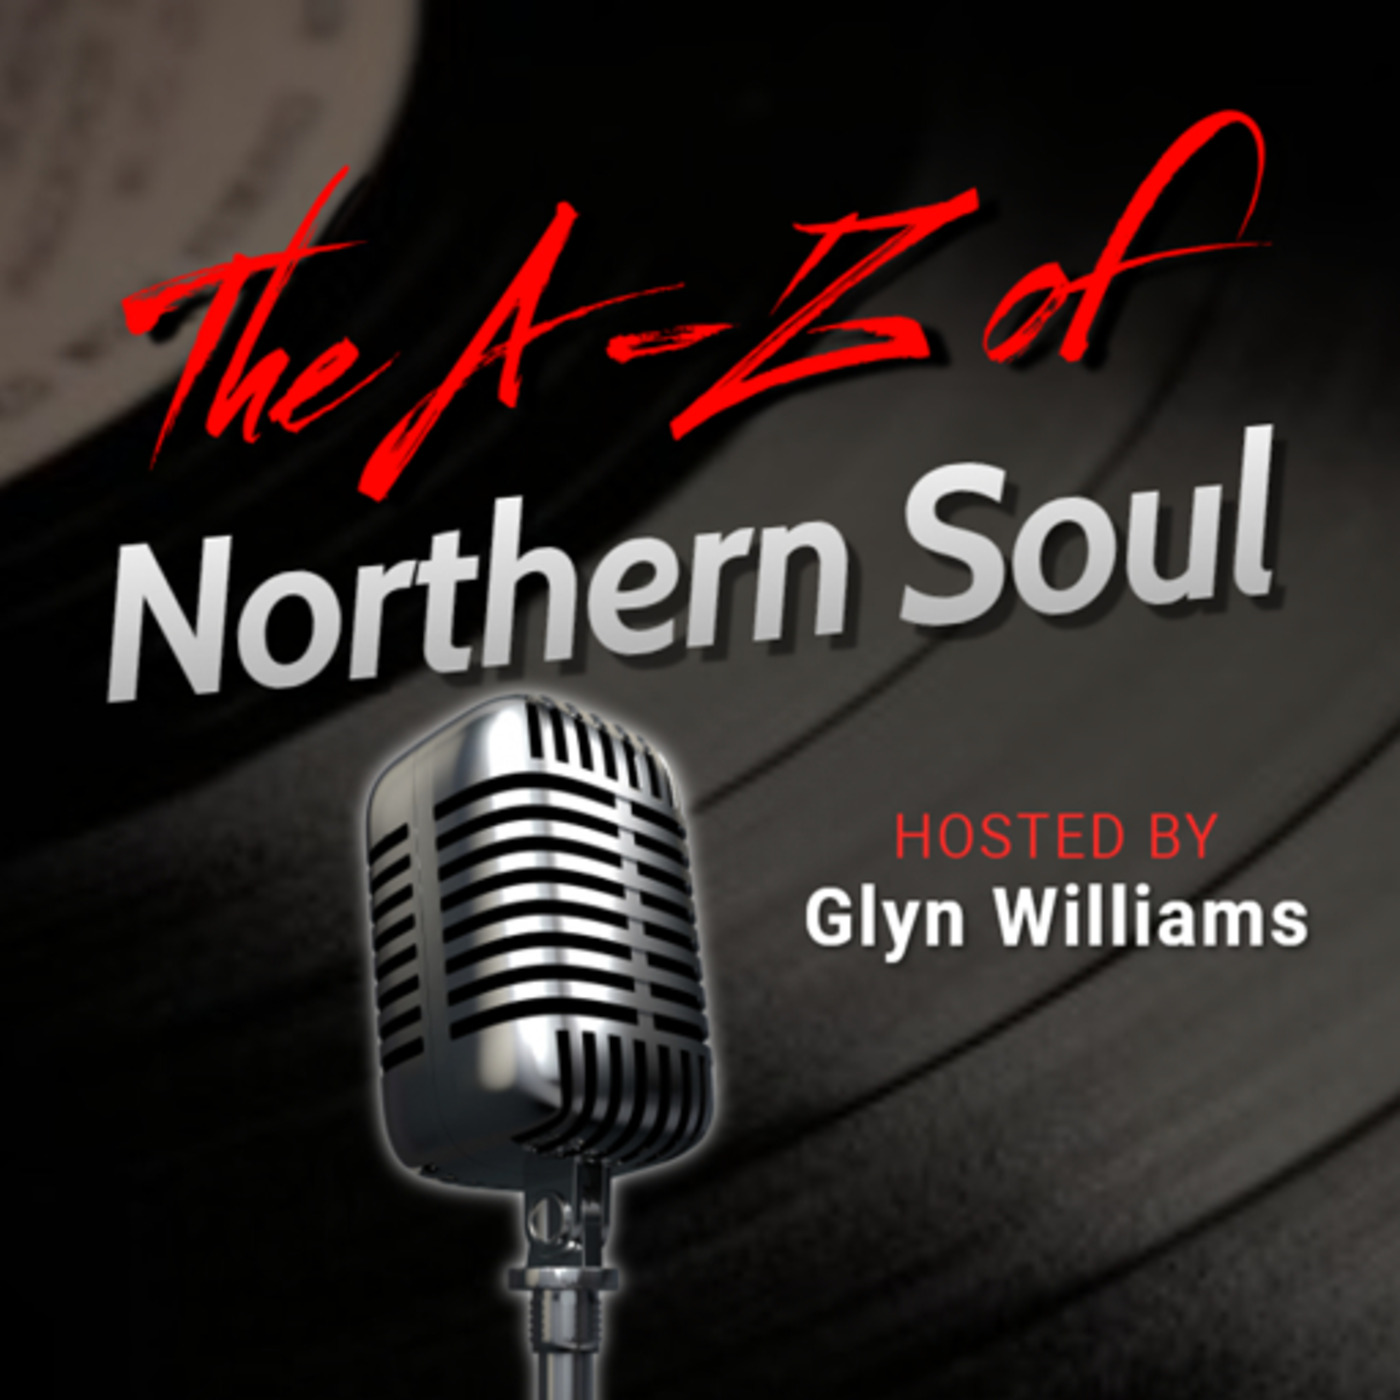 The A-Z of Northern Soul E070